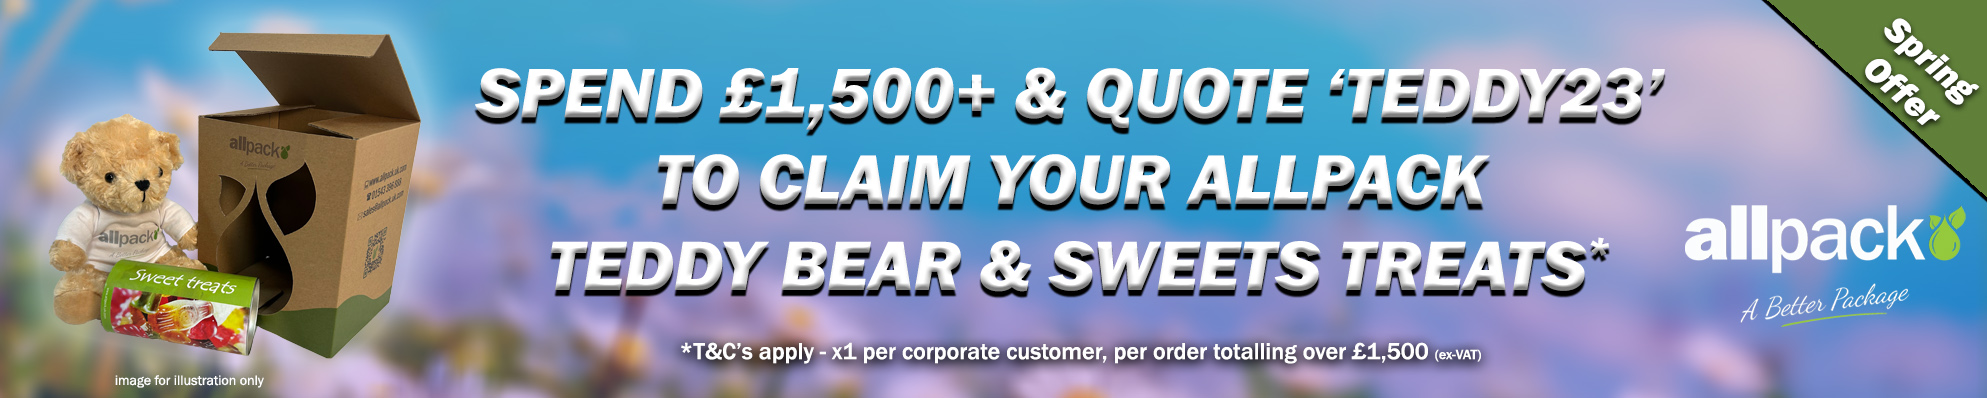 Email footer artwork v2 - Teddy Bear + Sweets Offer copy